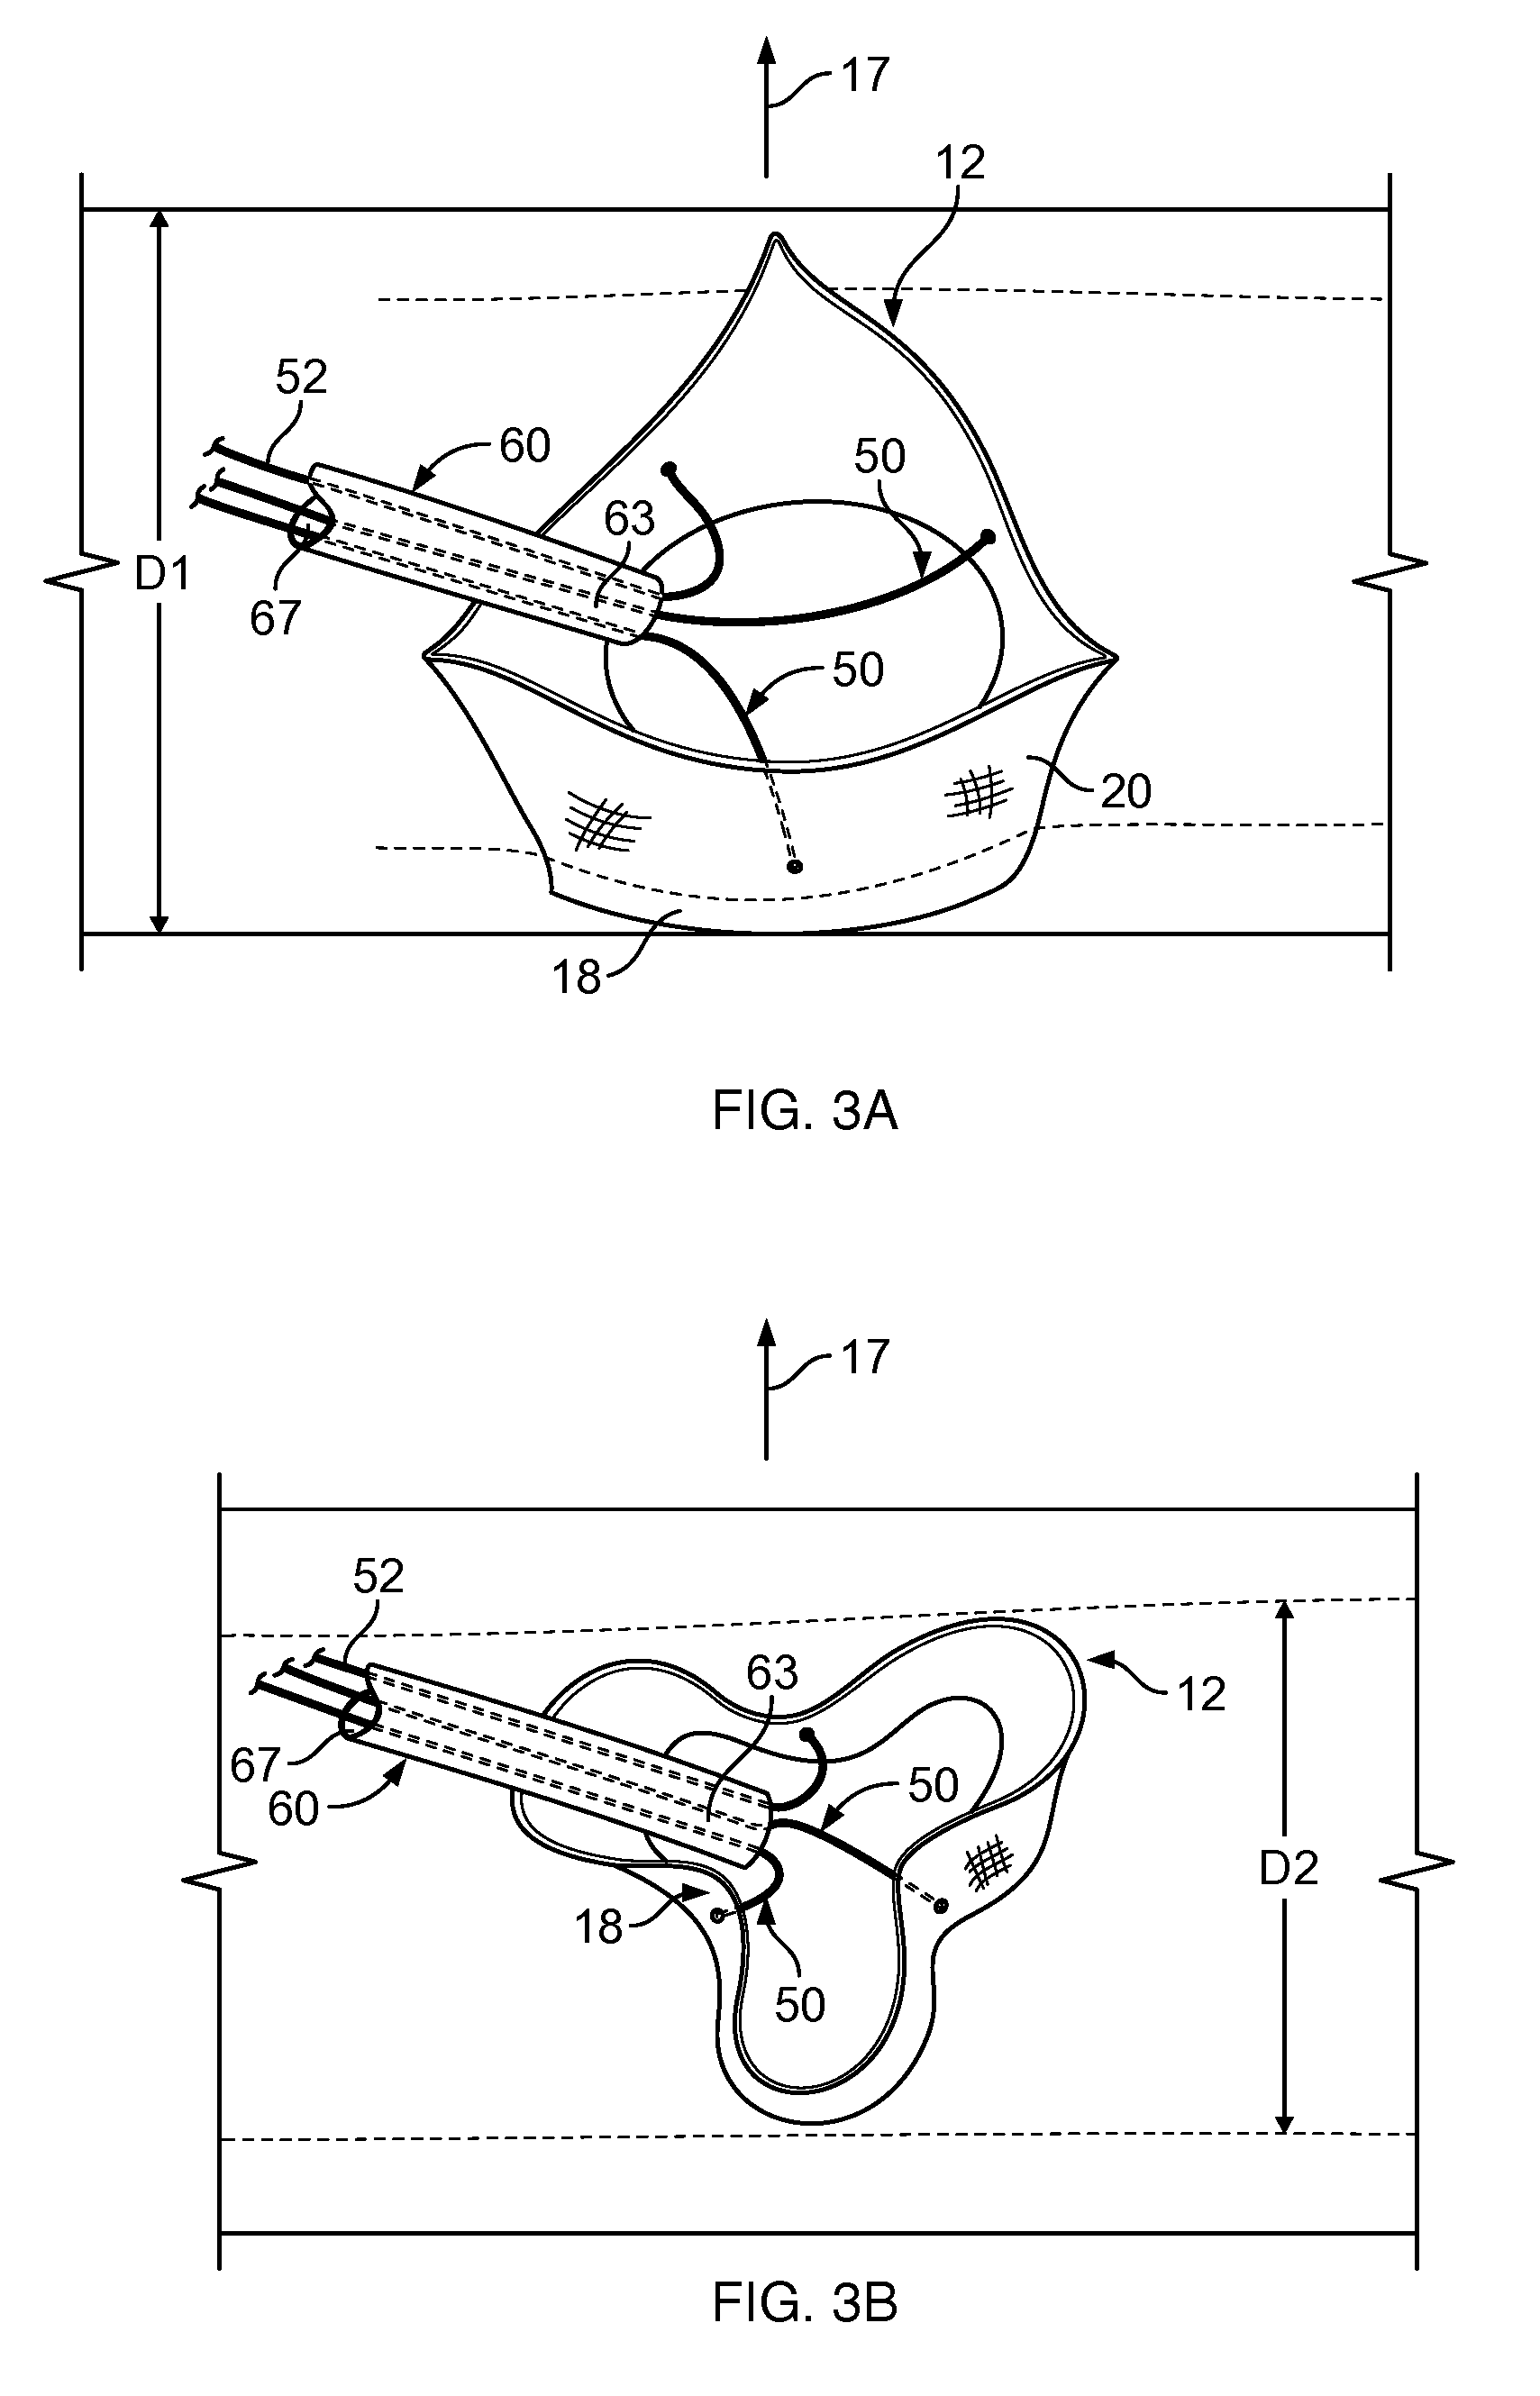 Multiple component prosthetic heart valve assemblies and methods for delivering them